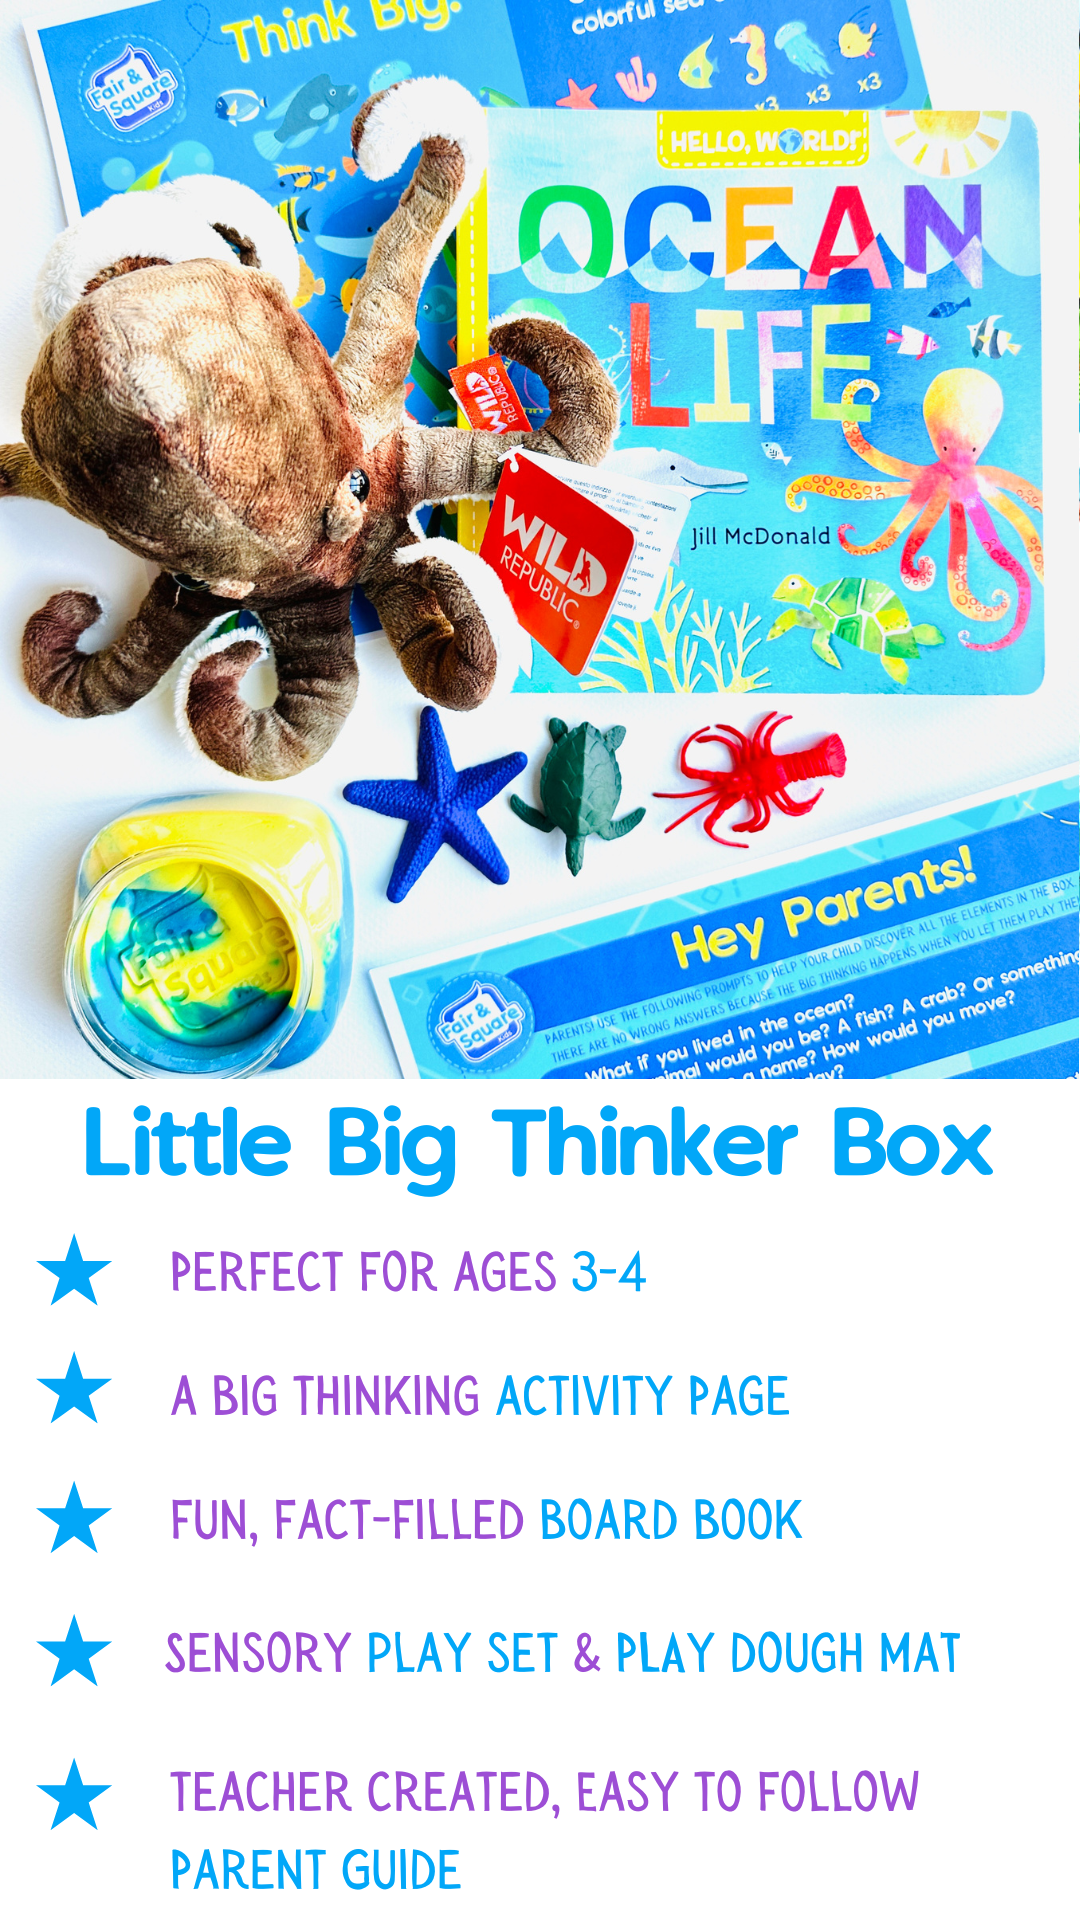 Little Big Thinker Box: Perfect for ages 3-4. A big thinking activity page. Fun fact-filled board book. Sensory play set and play dough mat. Teacher created, easy to follow parent guide. 